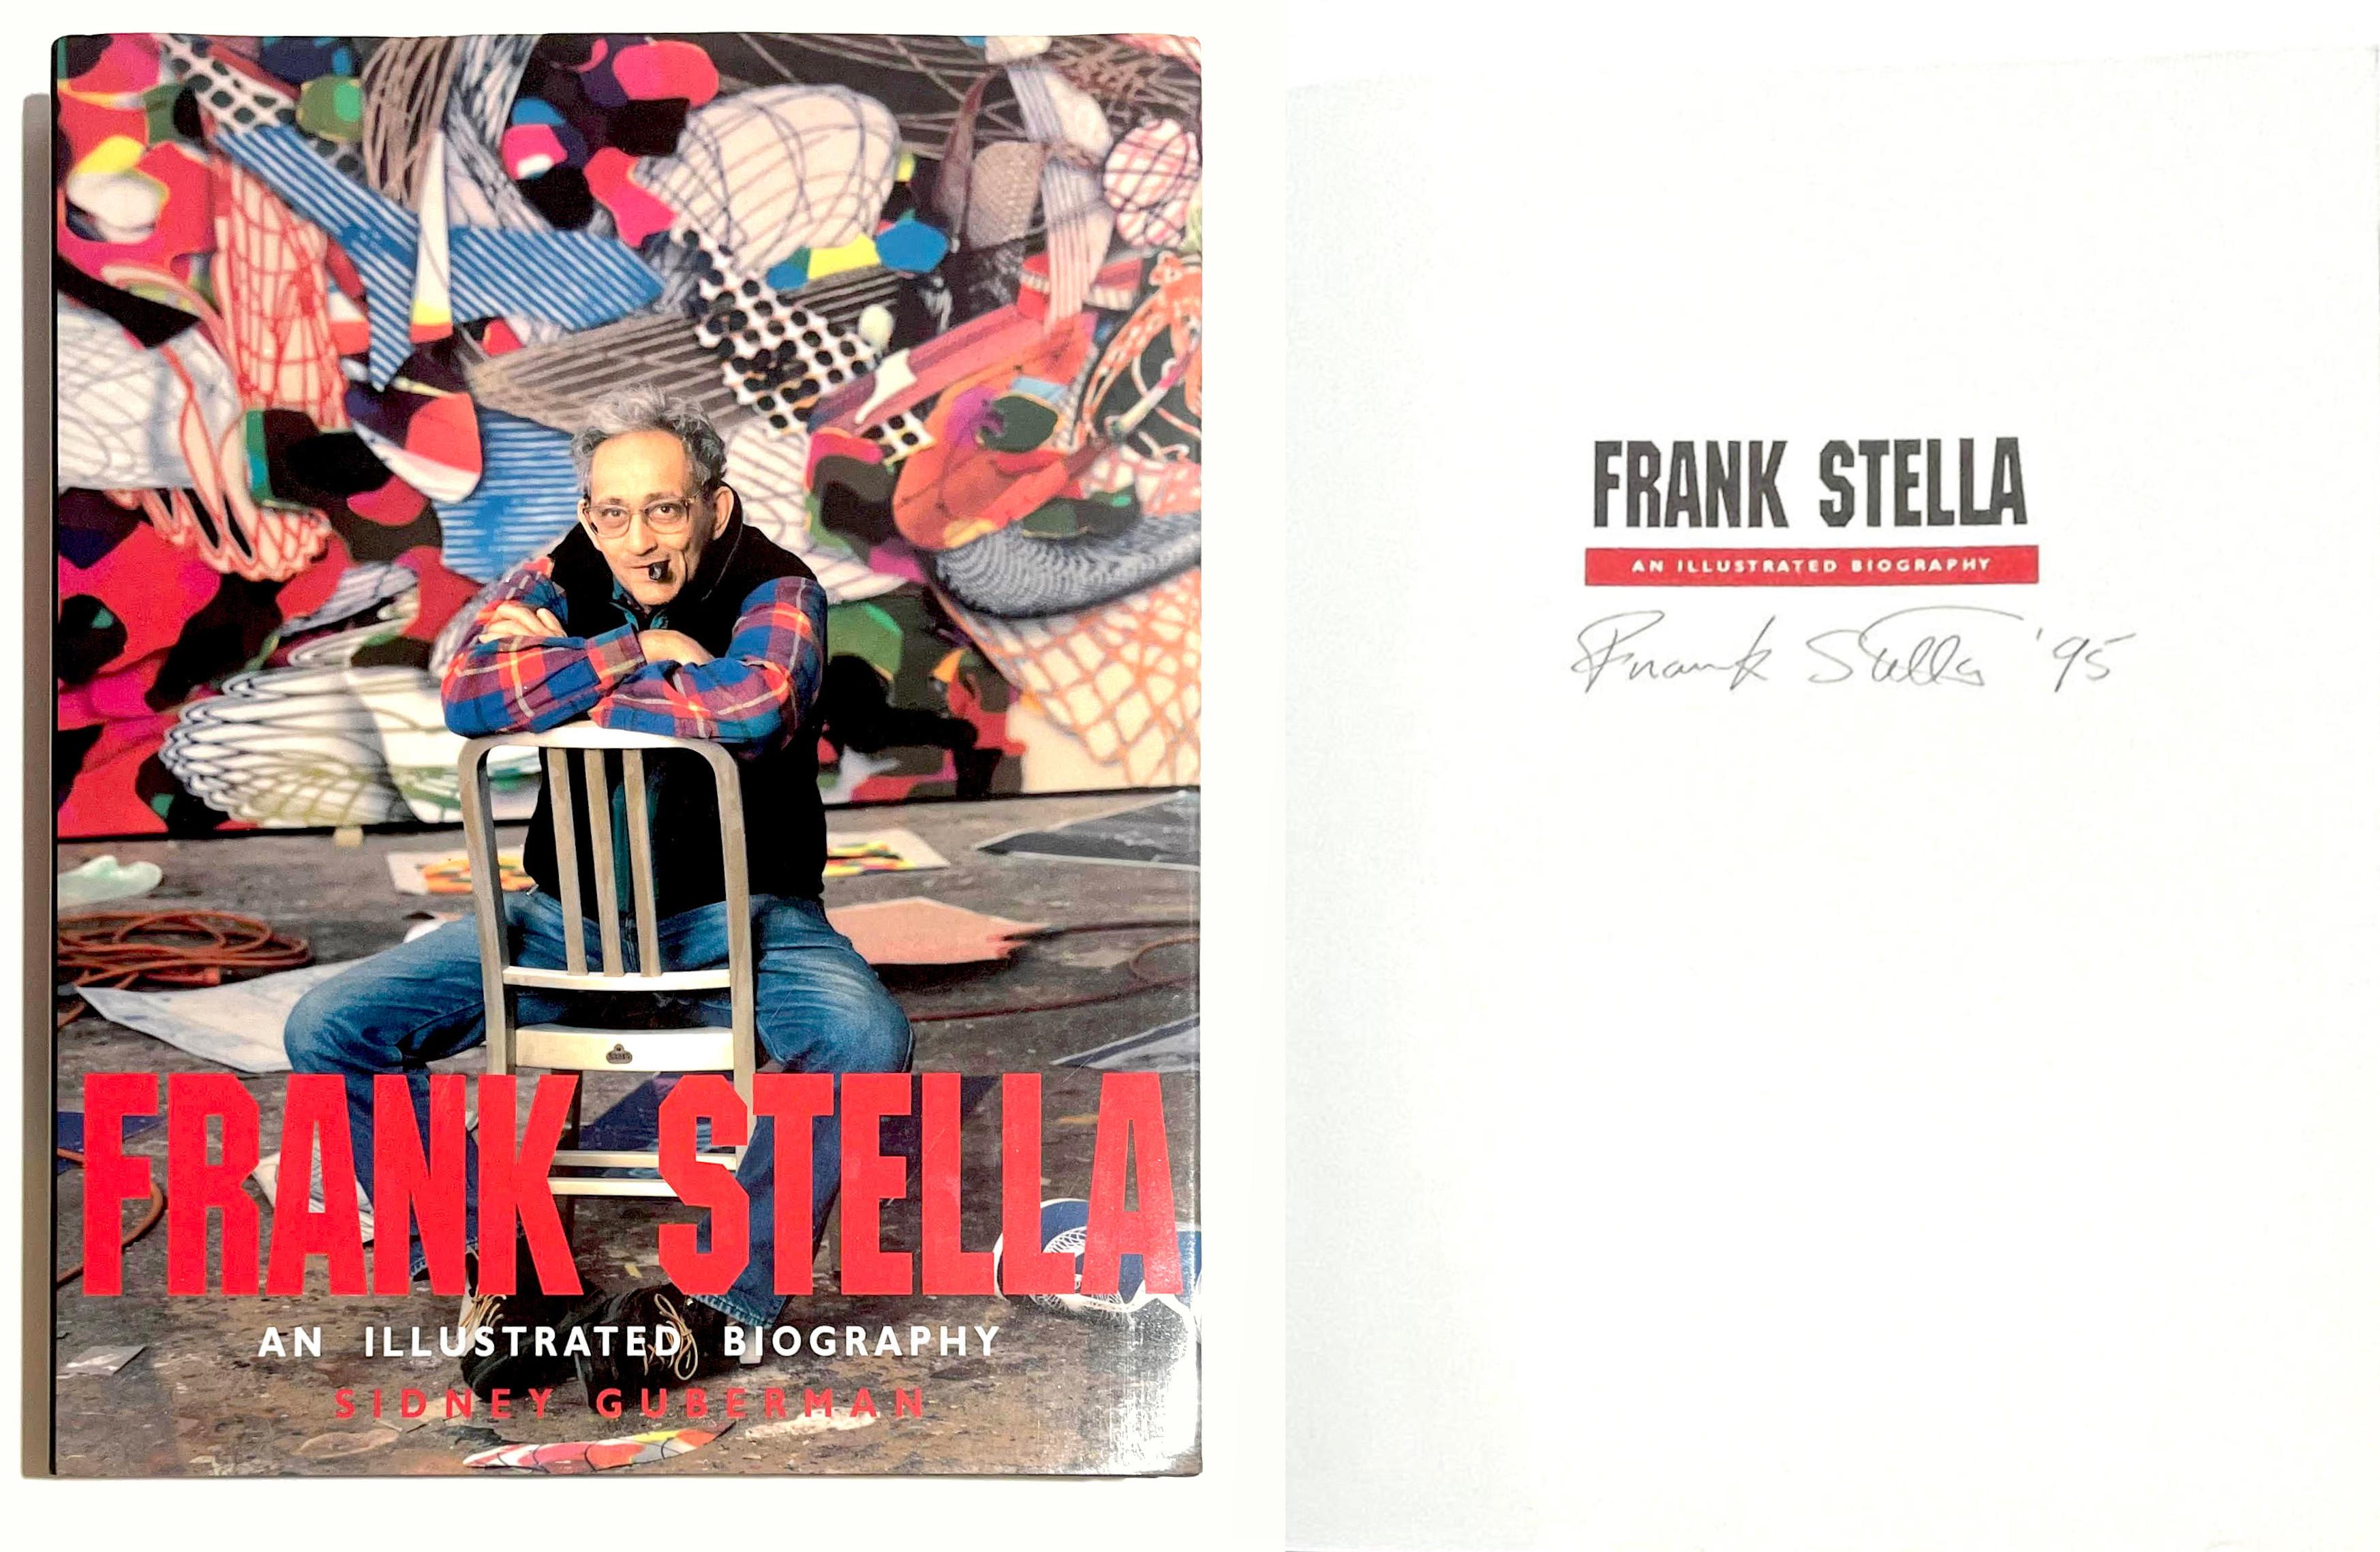 Frank Stella; An Illustrated Biography (Hand signed and dated by Frank Stella)